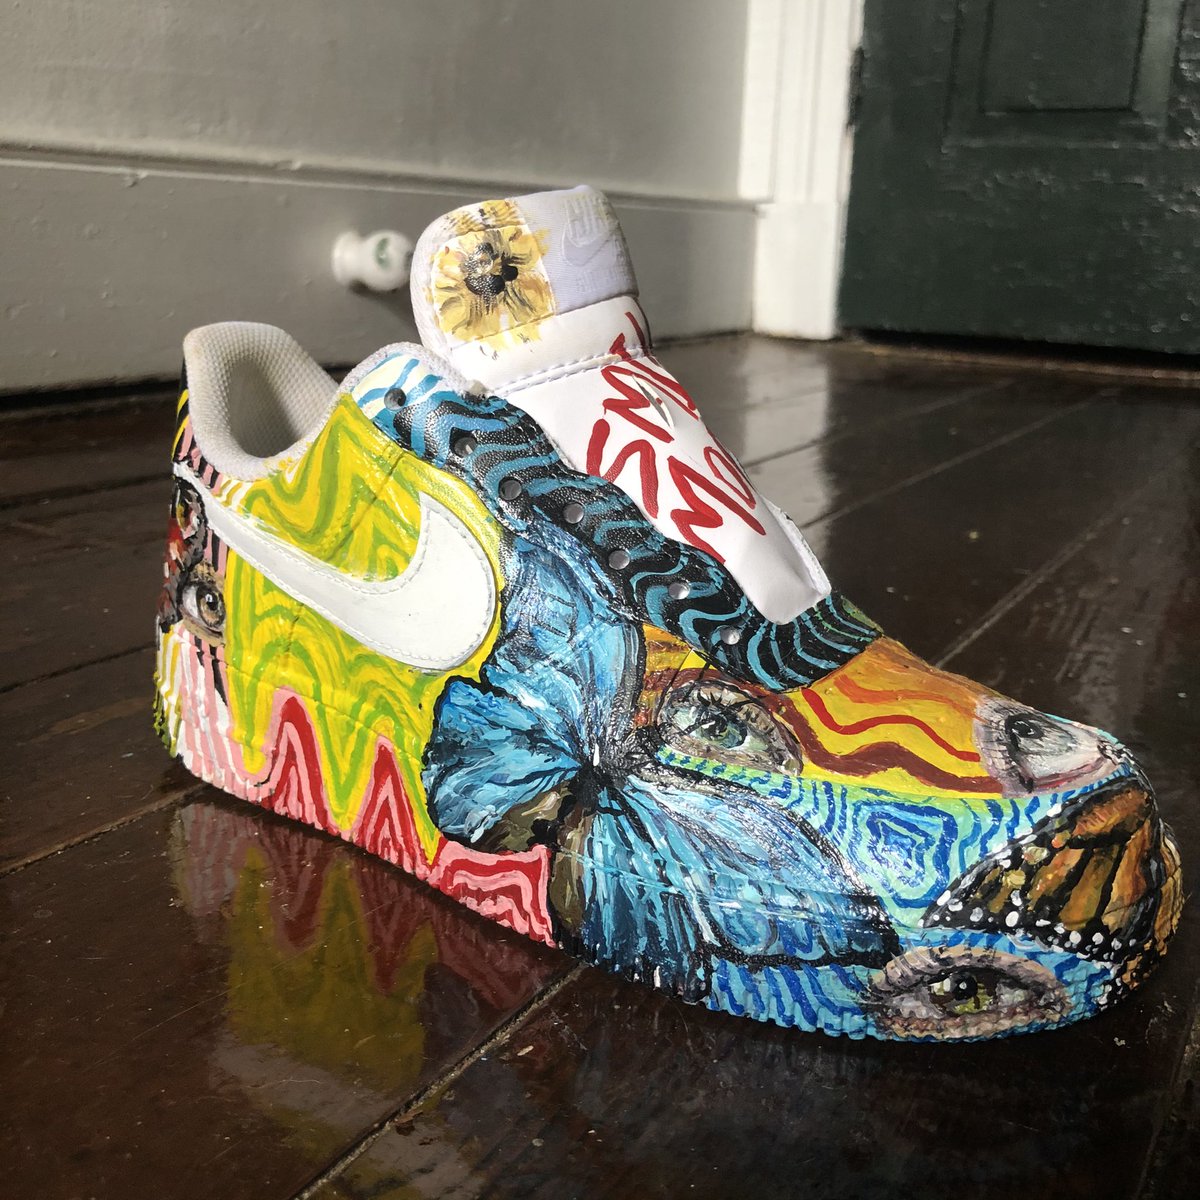 Just a reminder that I painted these dope asf shoes 🌼